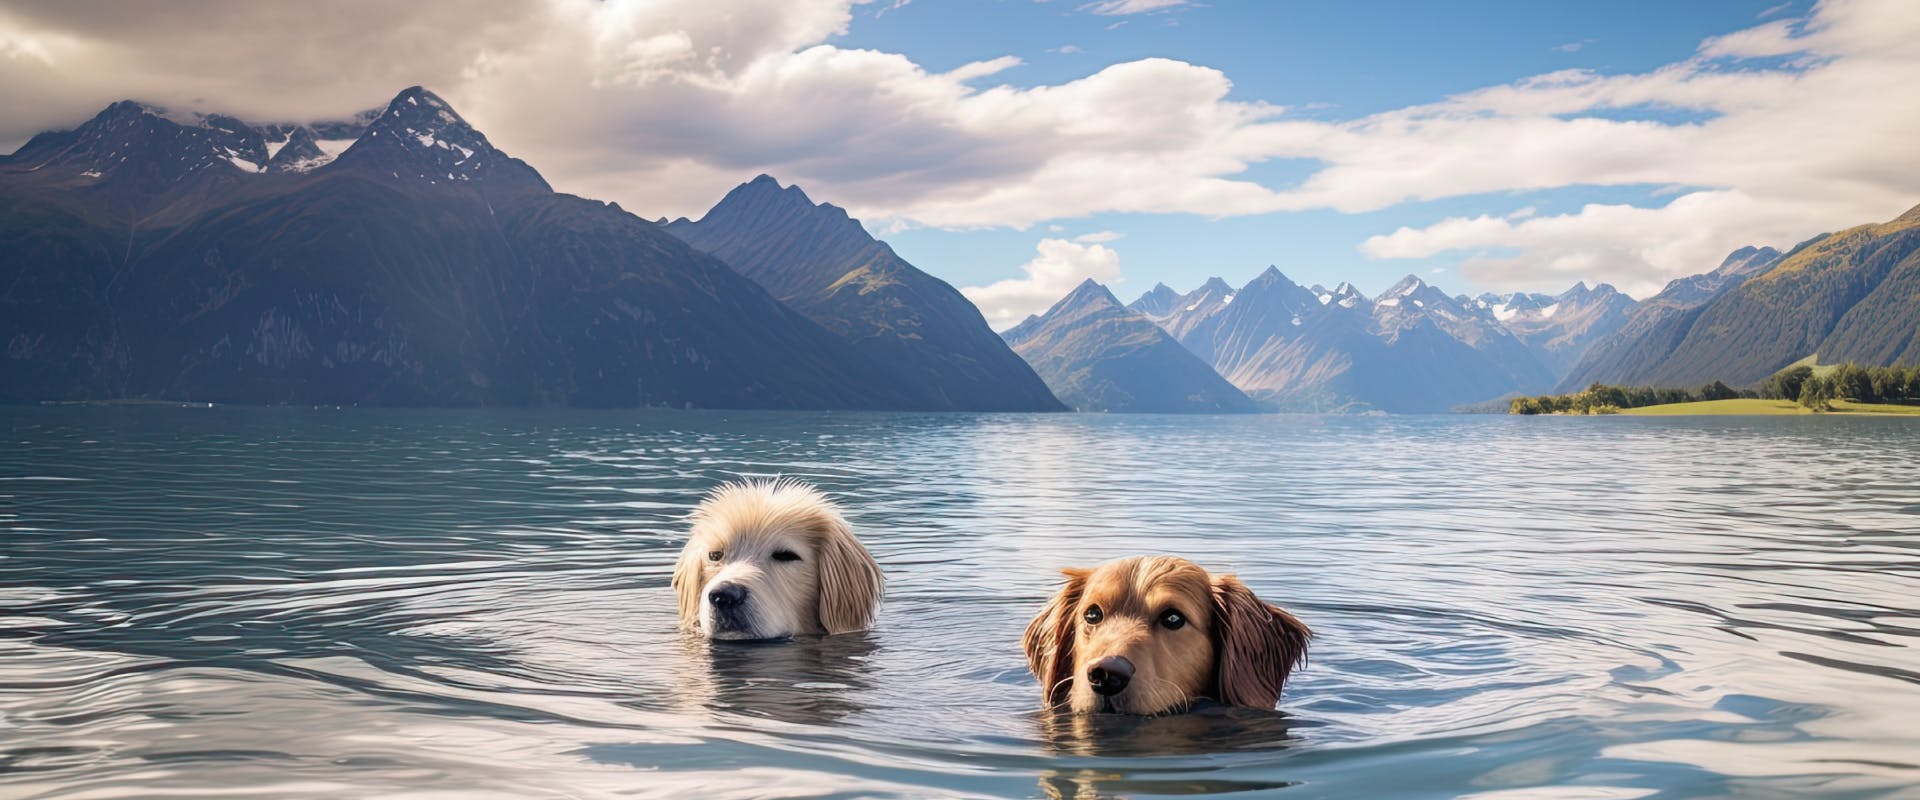 two dogs swimming in a mountain lake